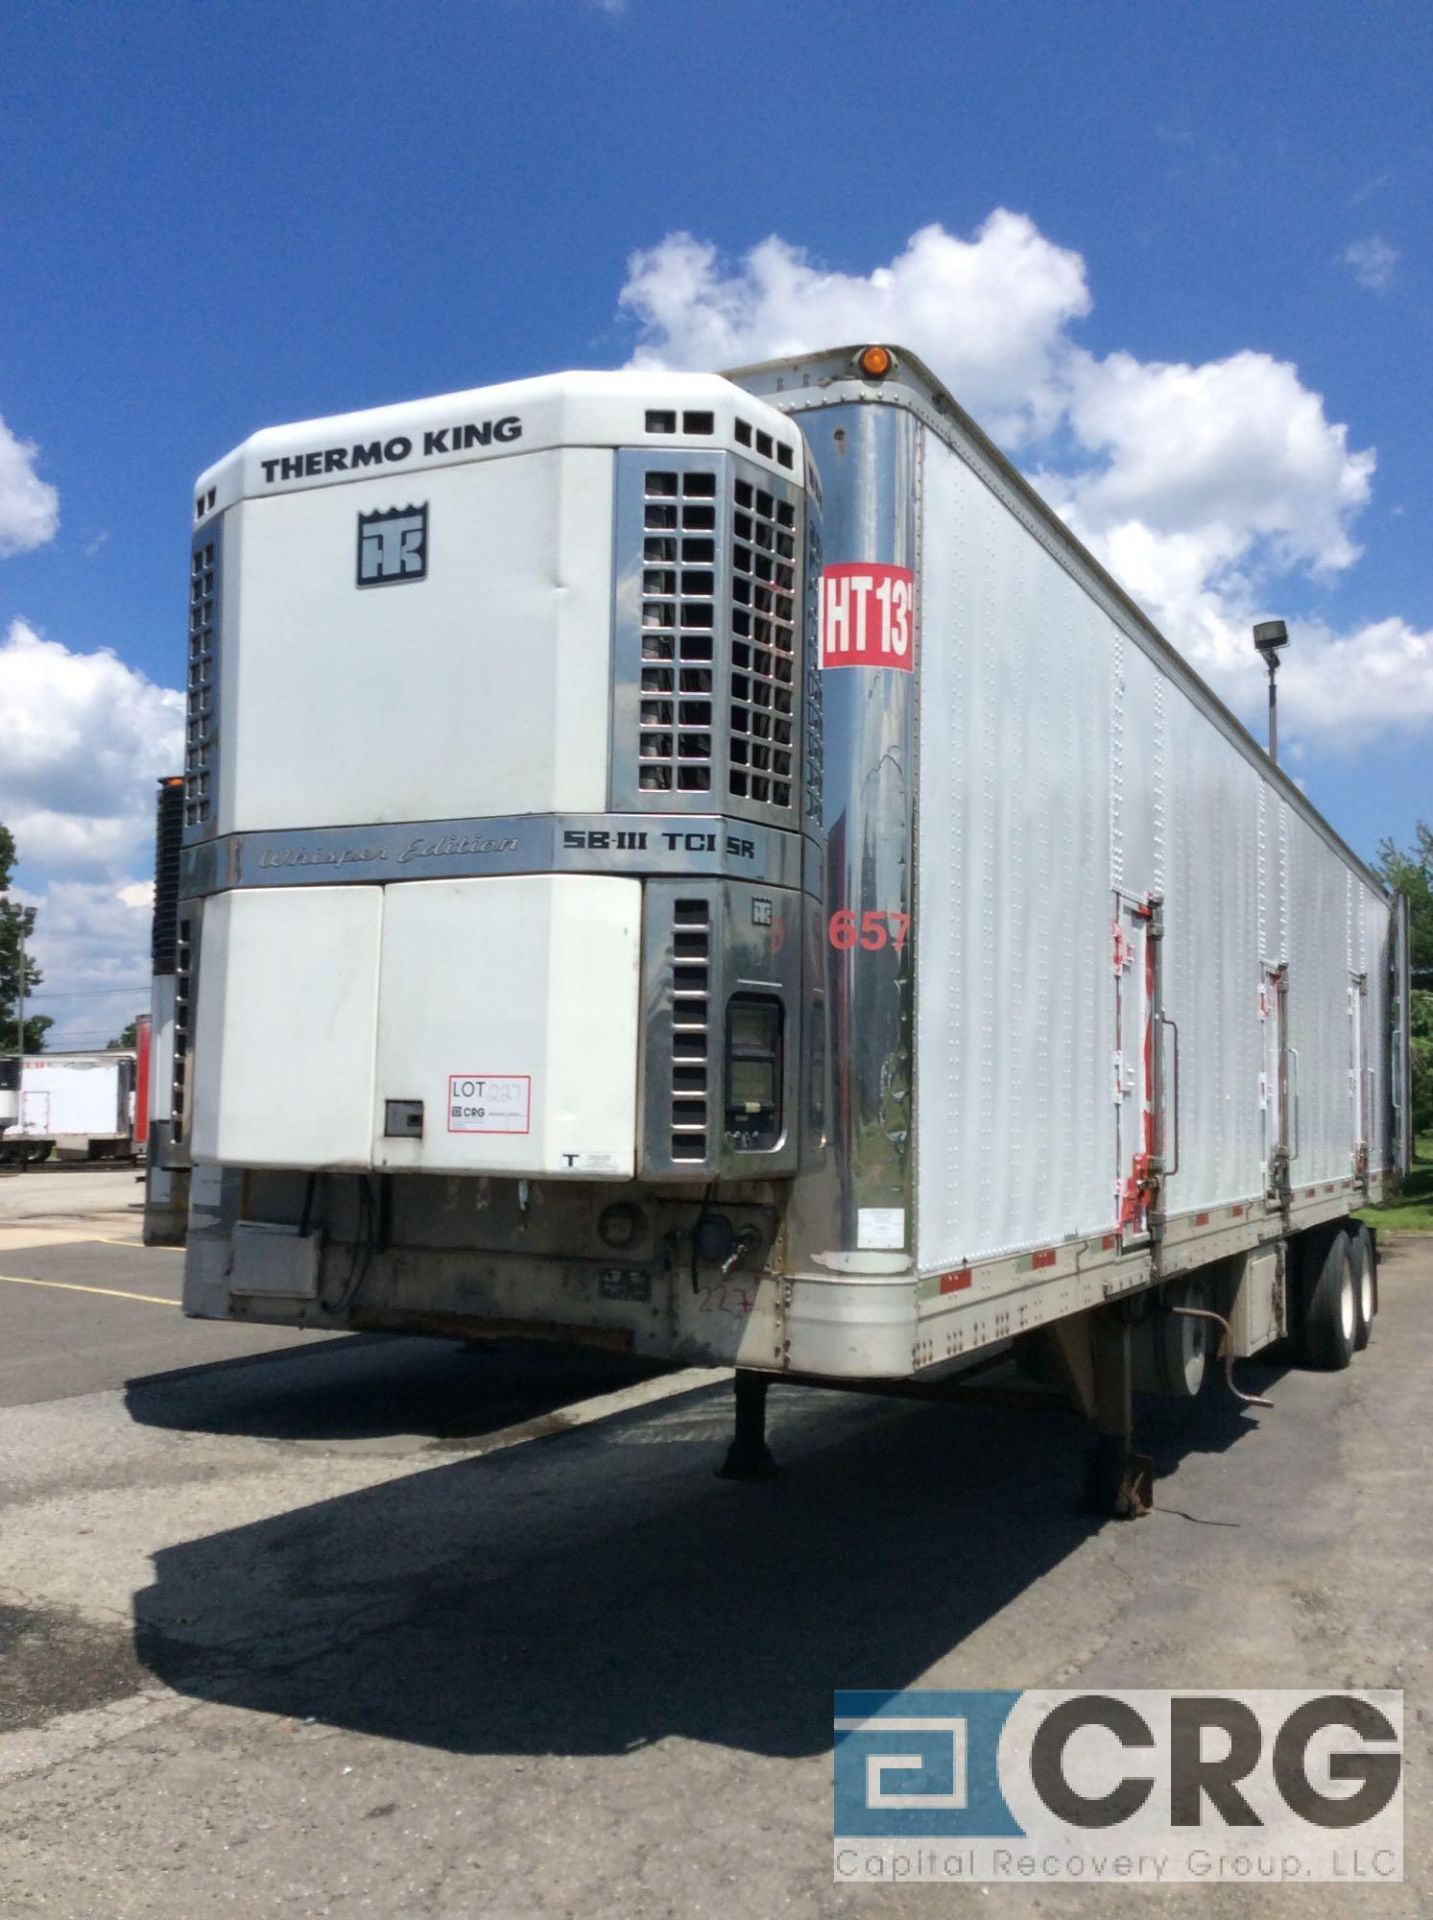 2002 Trailmobile Multi Temp Refrigerated Semi Trailer - 43 Long, 96" wide, Thermo King SBIII TCI- - Image 2 of 5